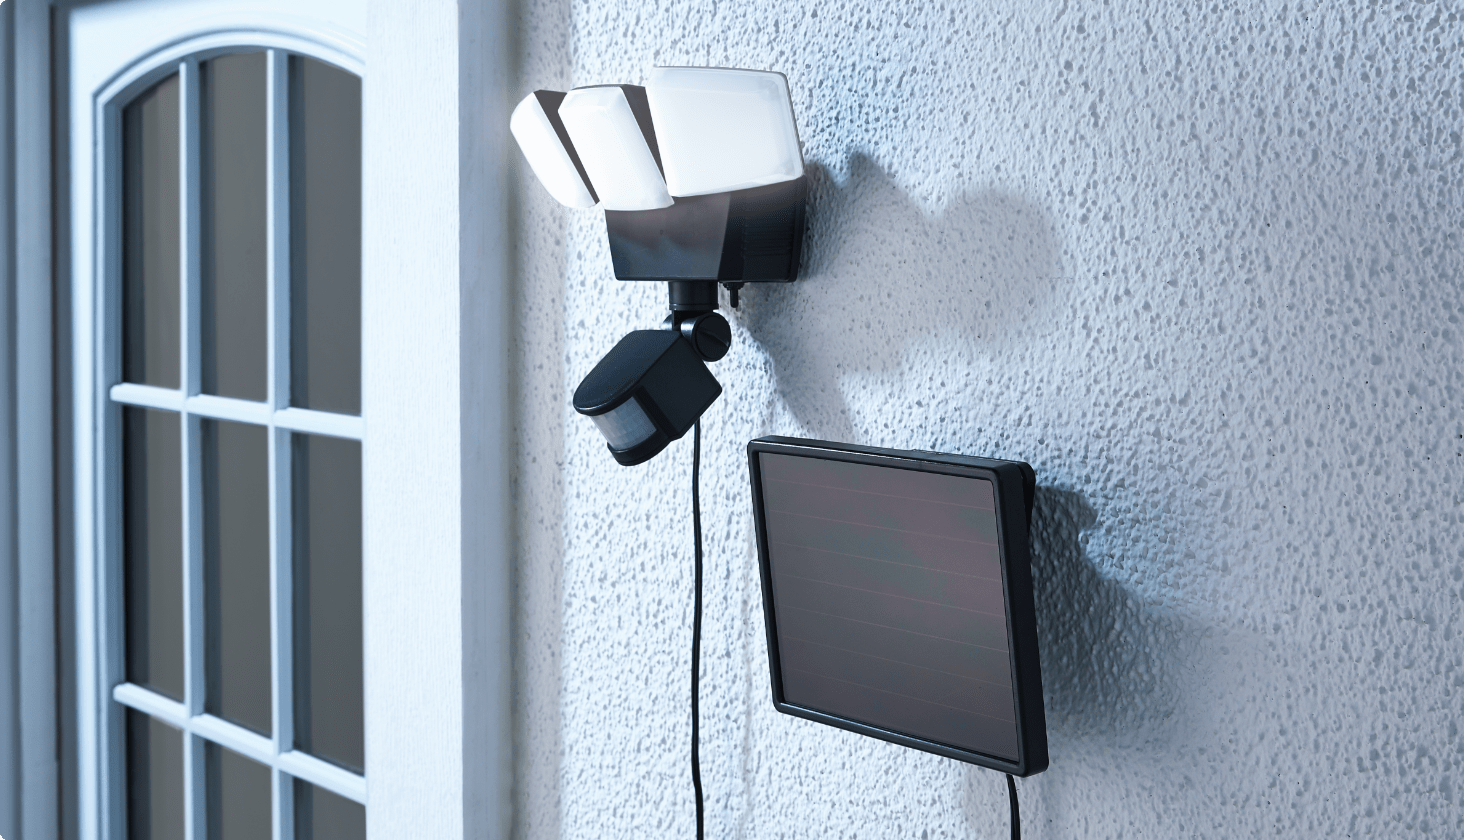 A NOMA 3-Head Security Light and solar panel mounted on a white stucco wall on the exterior of a home.